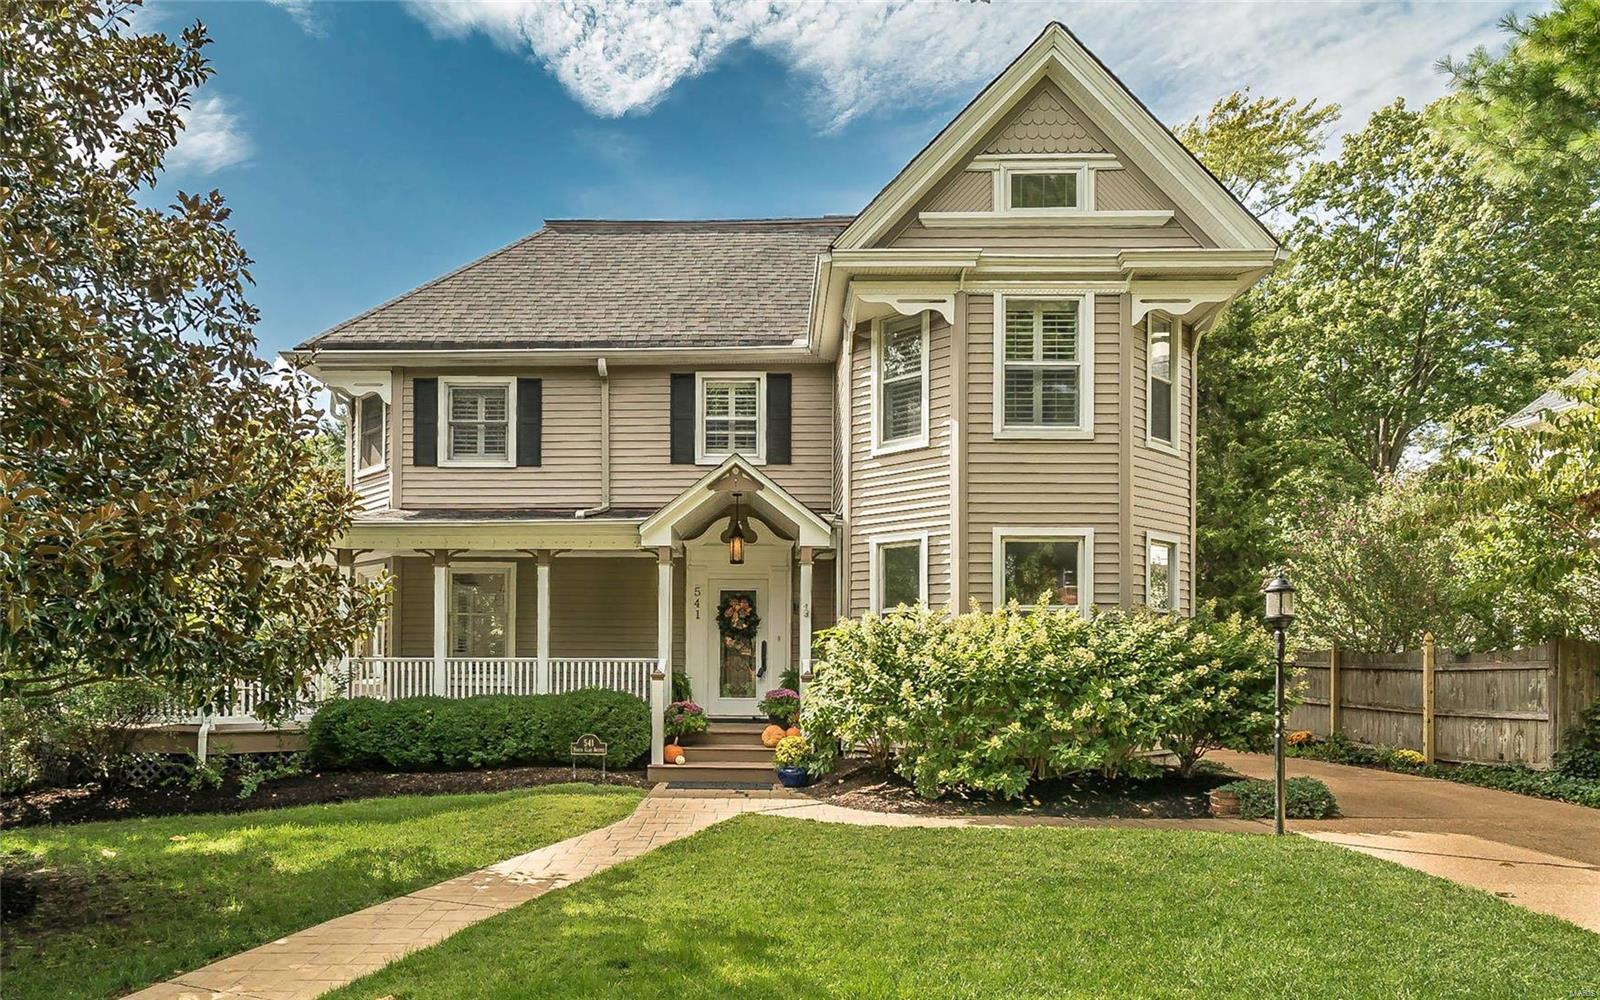 Blog Post: RedKey Open Houses: Sunday, March 31st, 2019